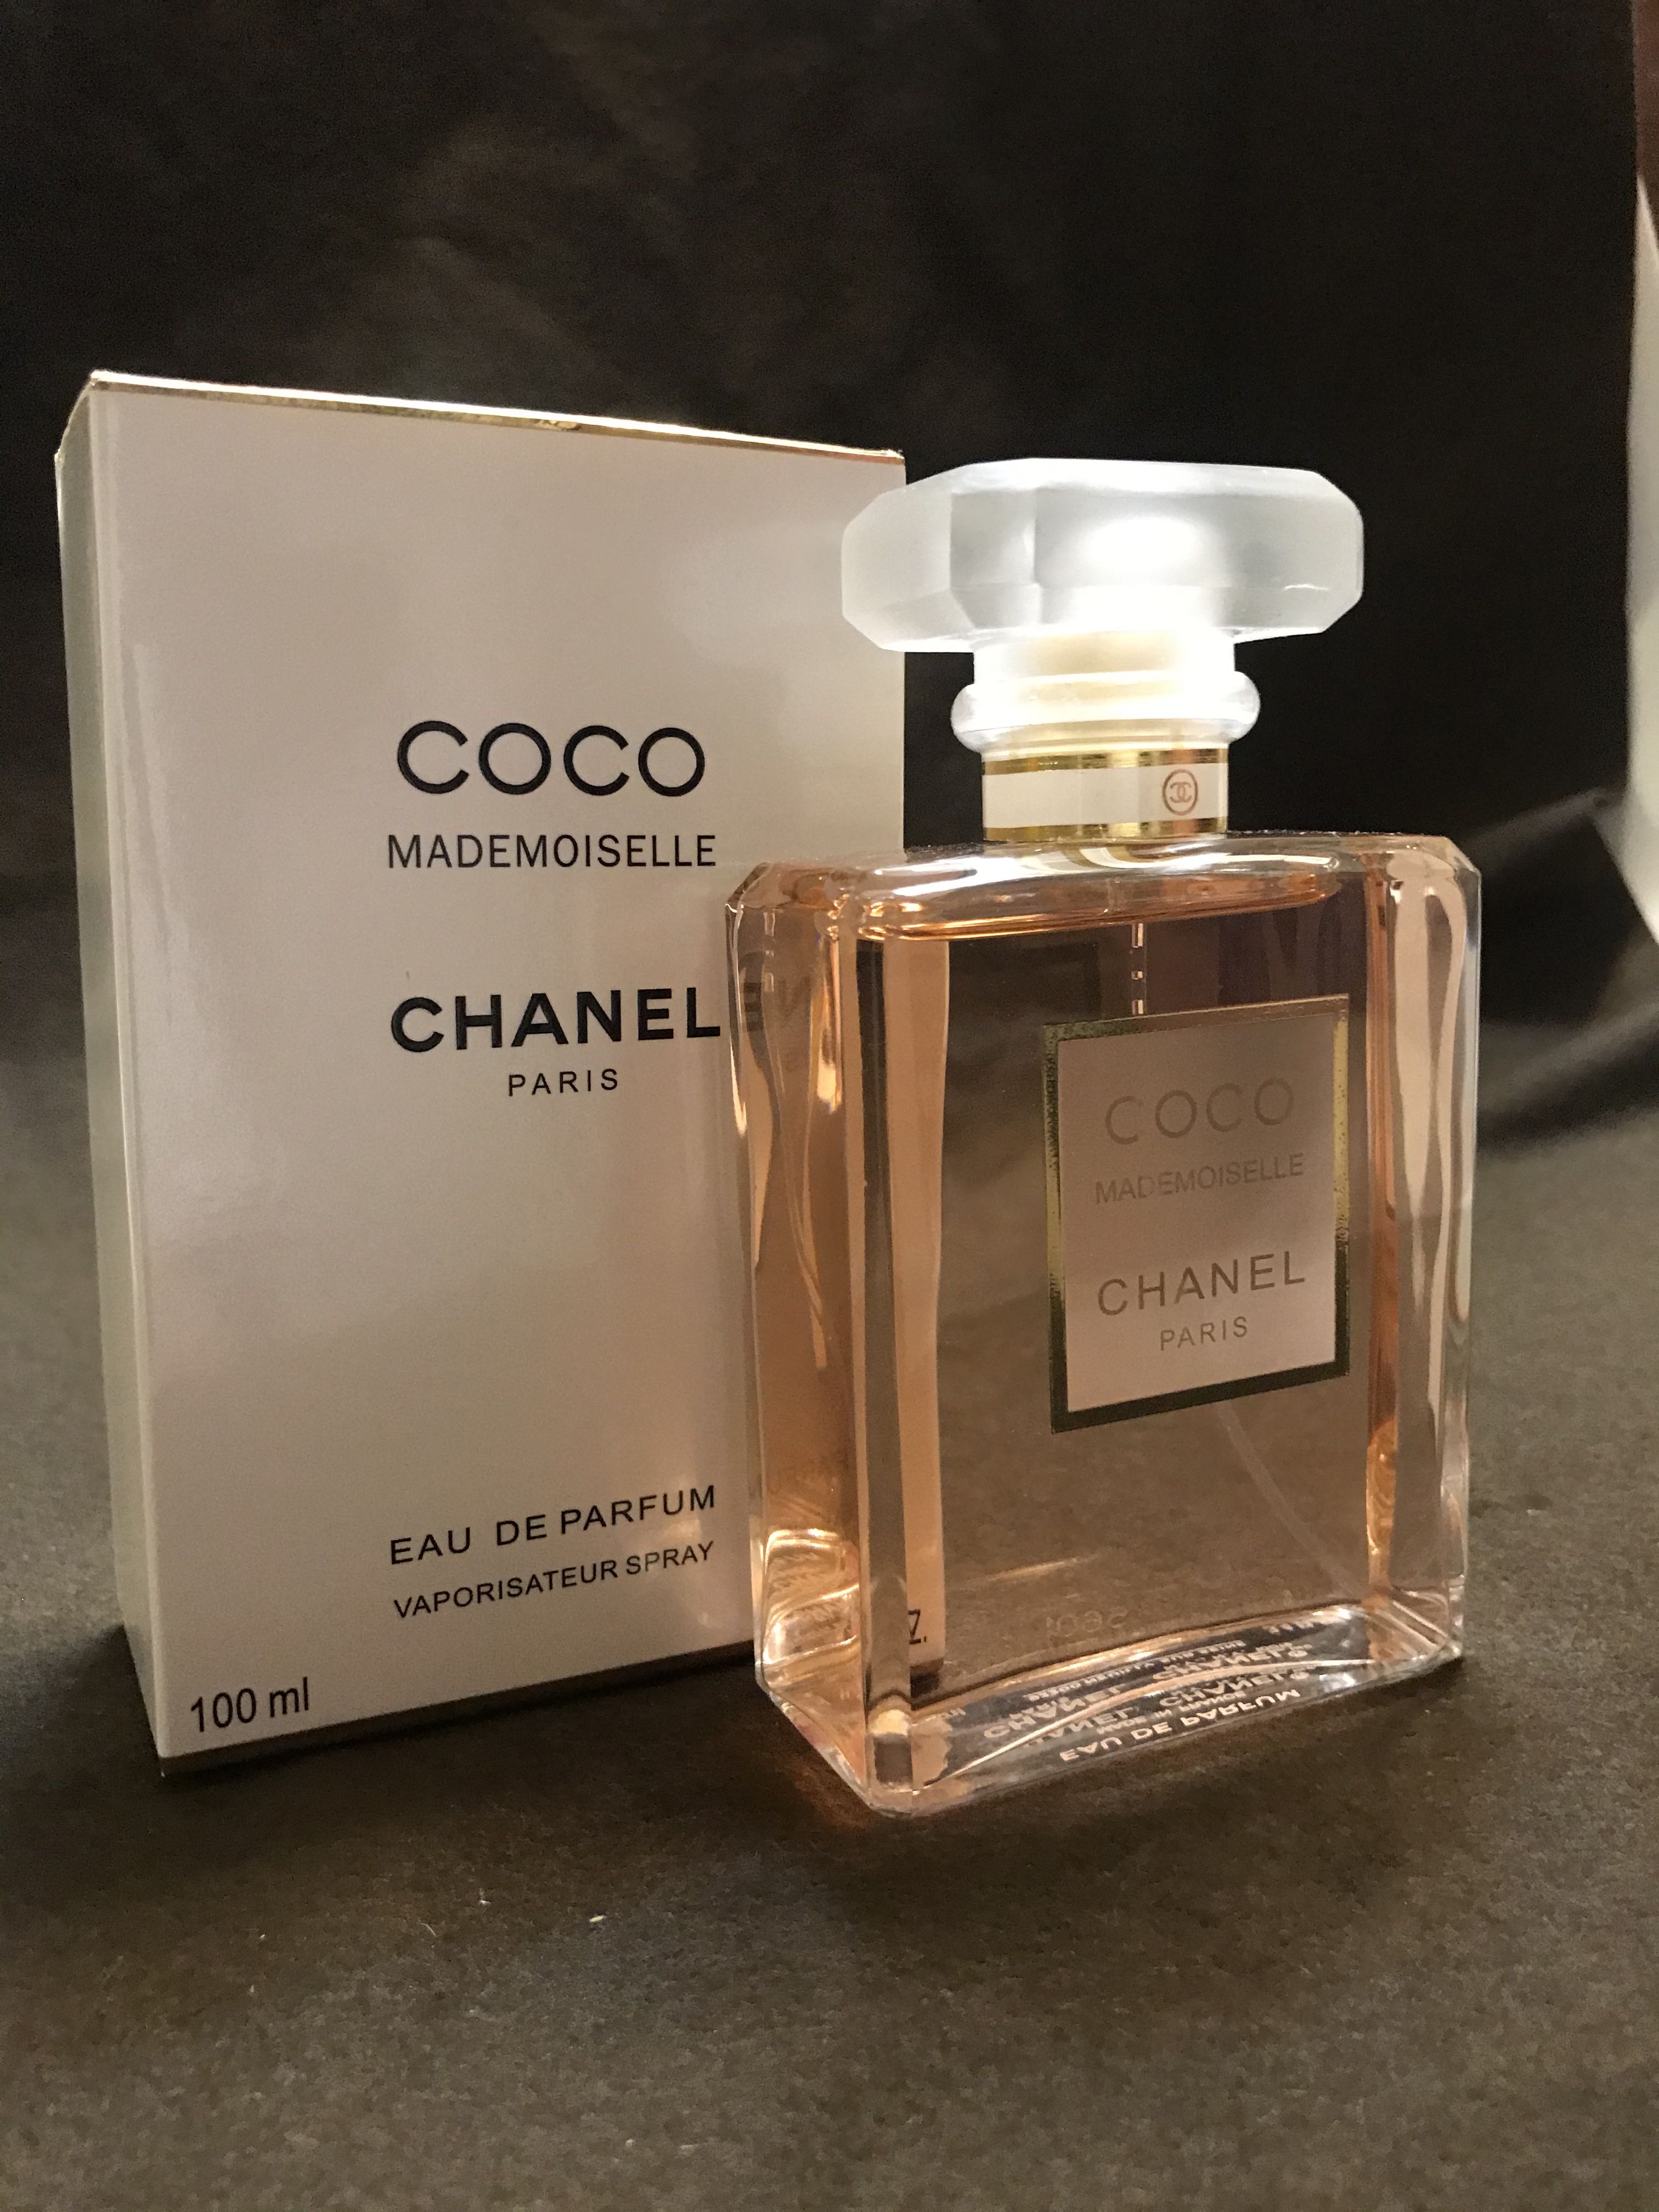 Chanel Coco Mademoiselle Eau de Parfum Intense for Her SweetCare United  States